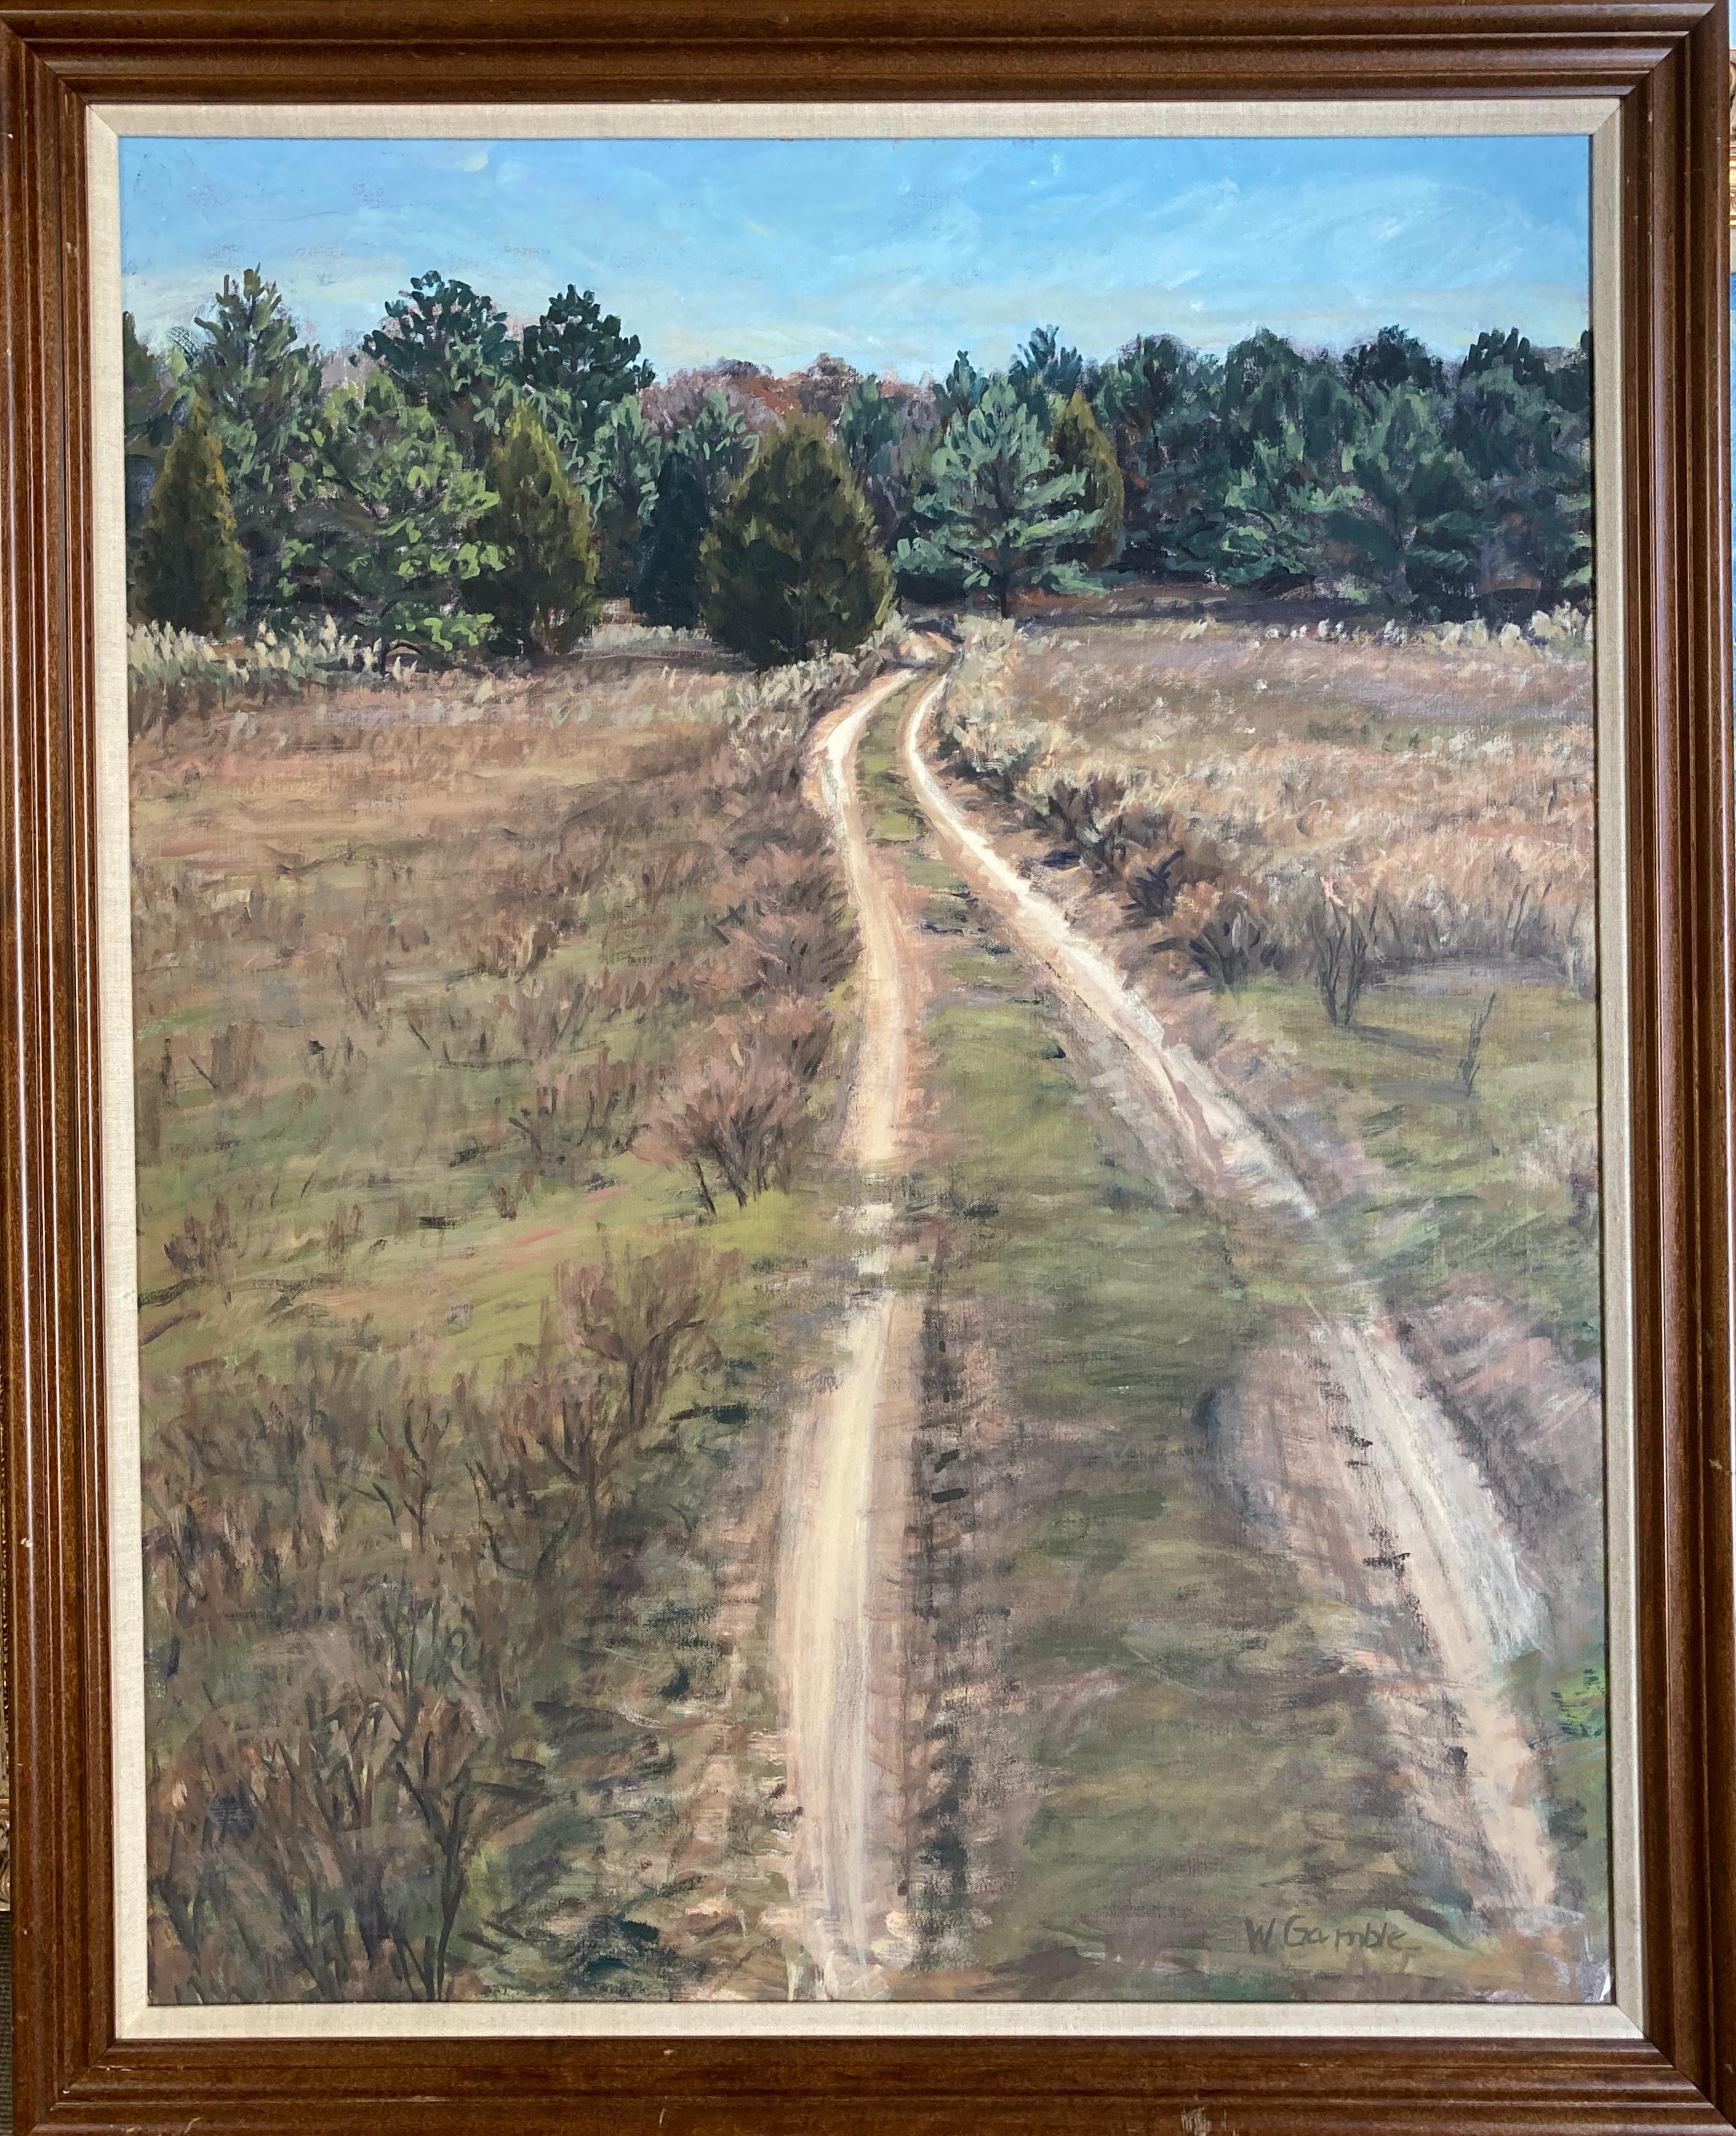 Wanda Gamble Landscape Painting - "Ranch Road" (ex. Freeport-McMoran Collection) - Framed Contemporary Landscape